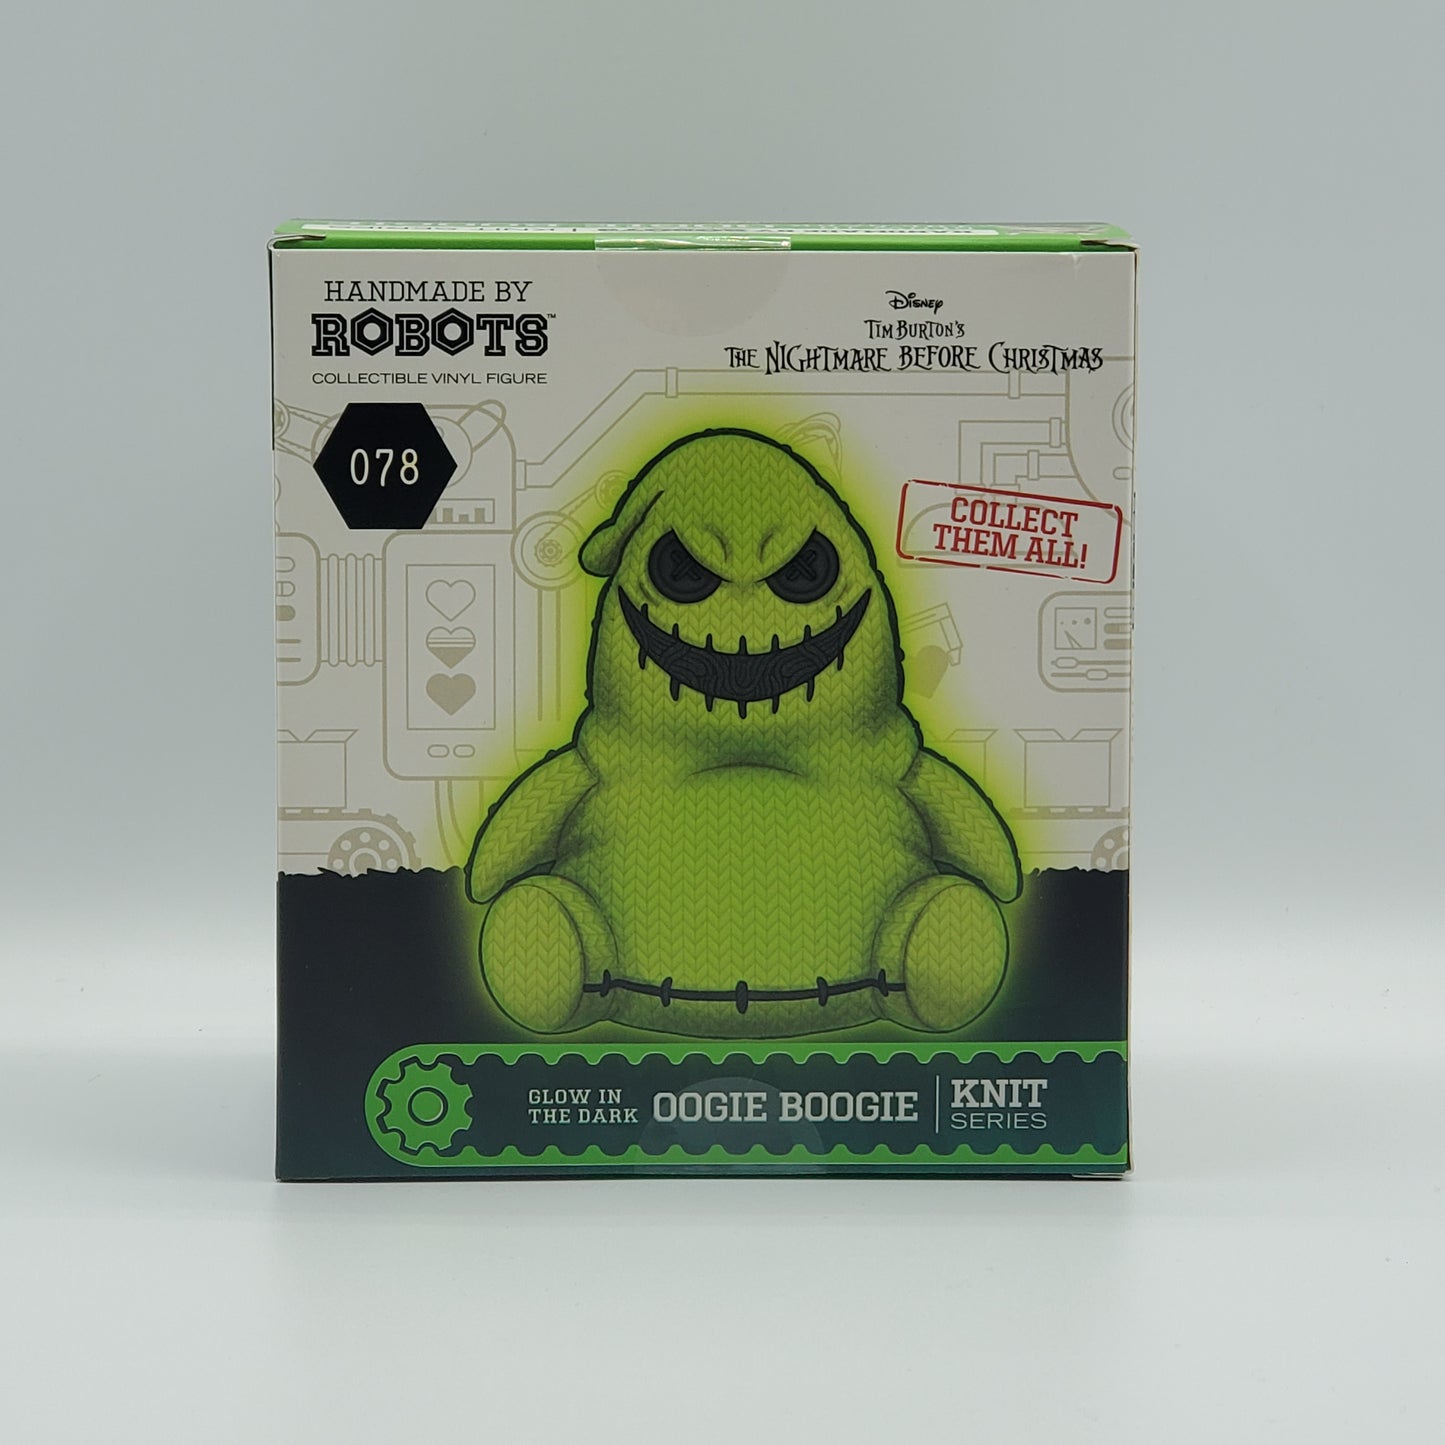 HANDMADE BY ROBOTS - OOGIE BOOGIE - GLOW IN THE DARK - LIMITED EDITION - GAMESTOP EXCLUSIVE